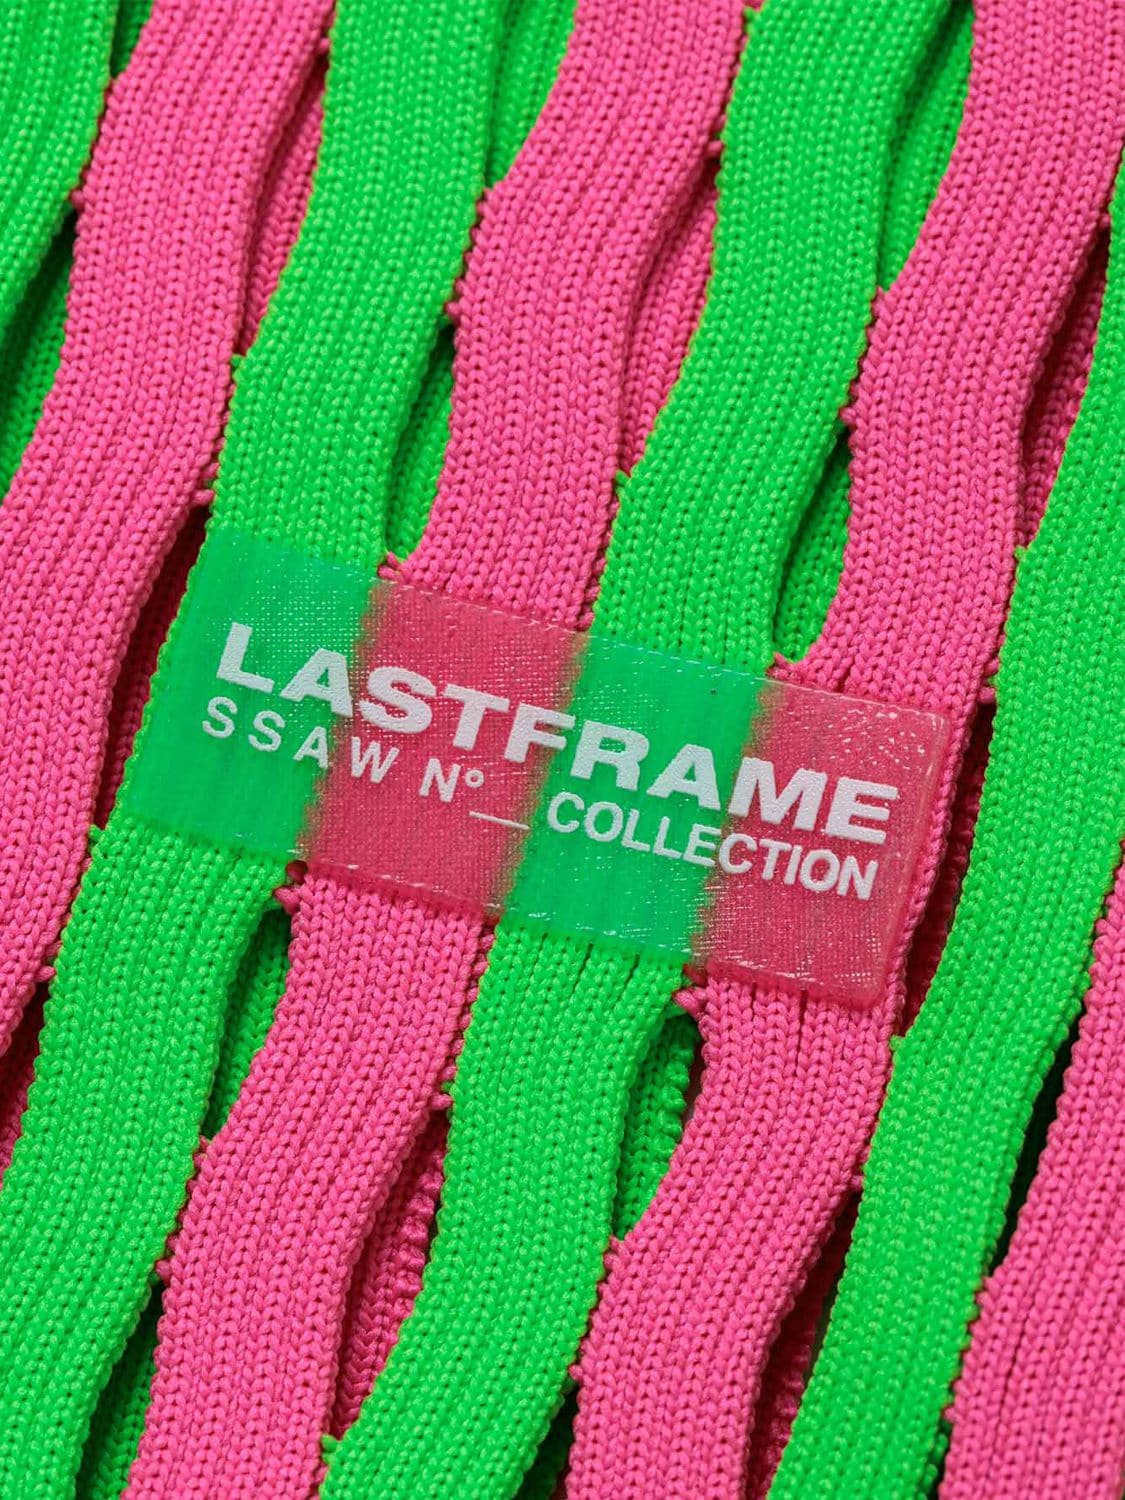 Lastframe Small Striped Mesh Market Bag In Neongreen,pink | ModeSens